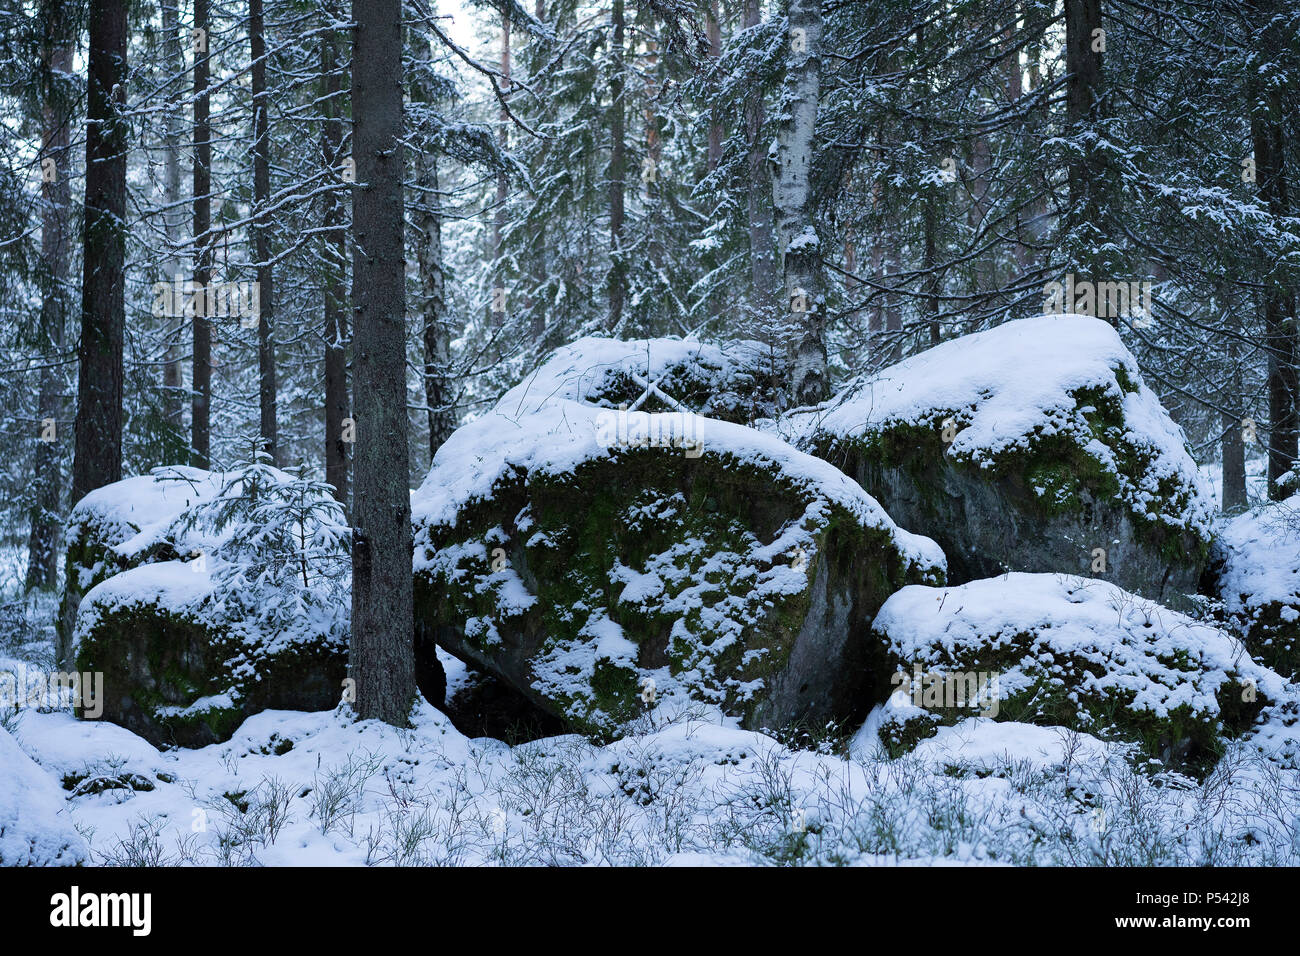 Beautiful nature and landscape photo of snowy winter forest in Sweden  Scandinavia. Nice, peaceful dusk evening with trees and snow Stock Photo -  Alamy